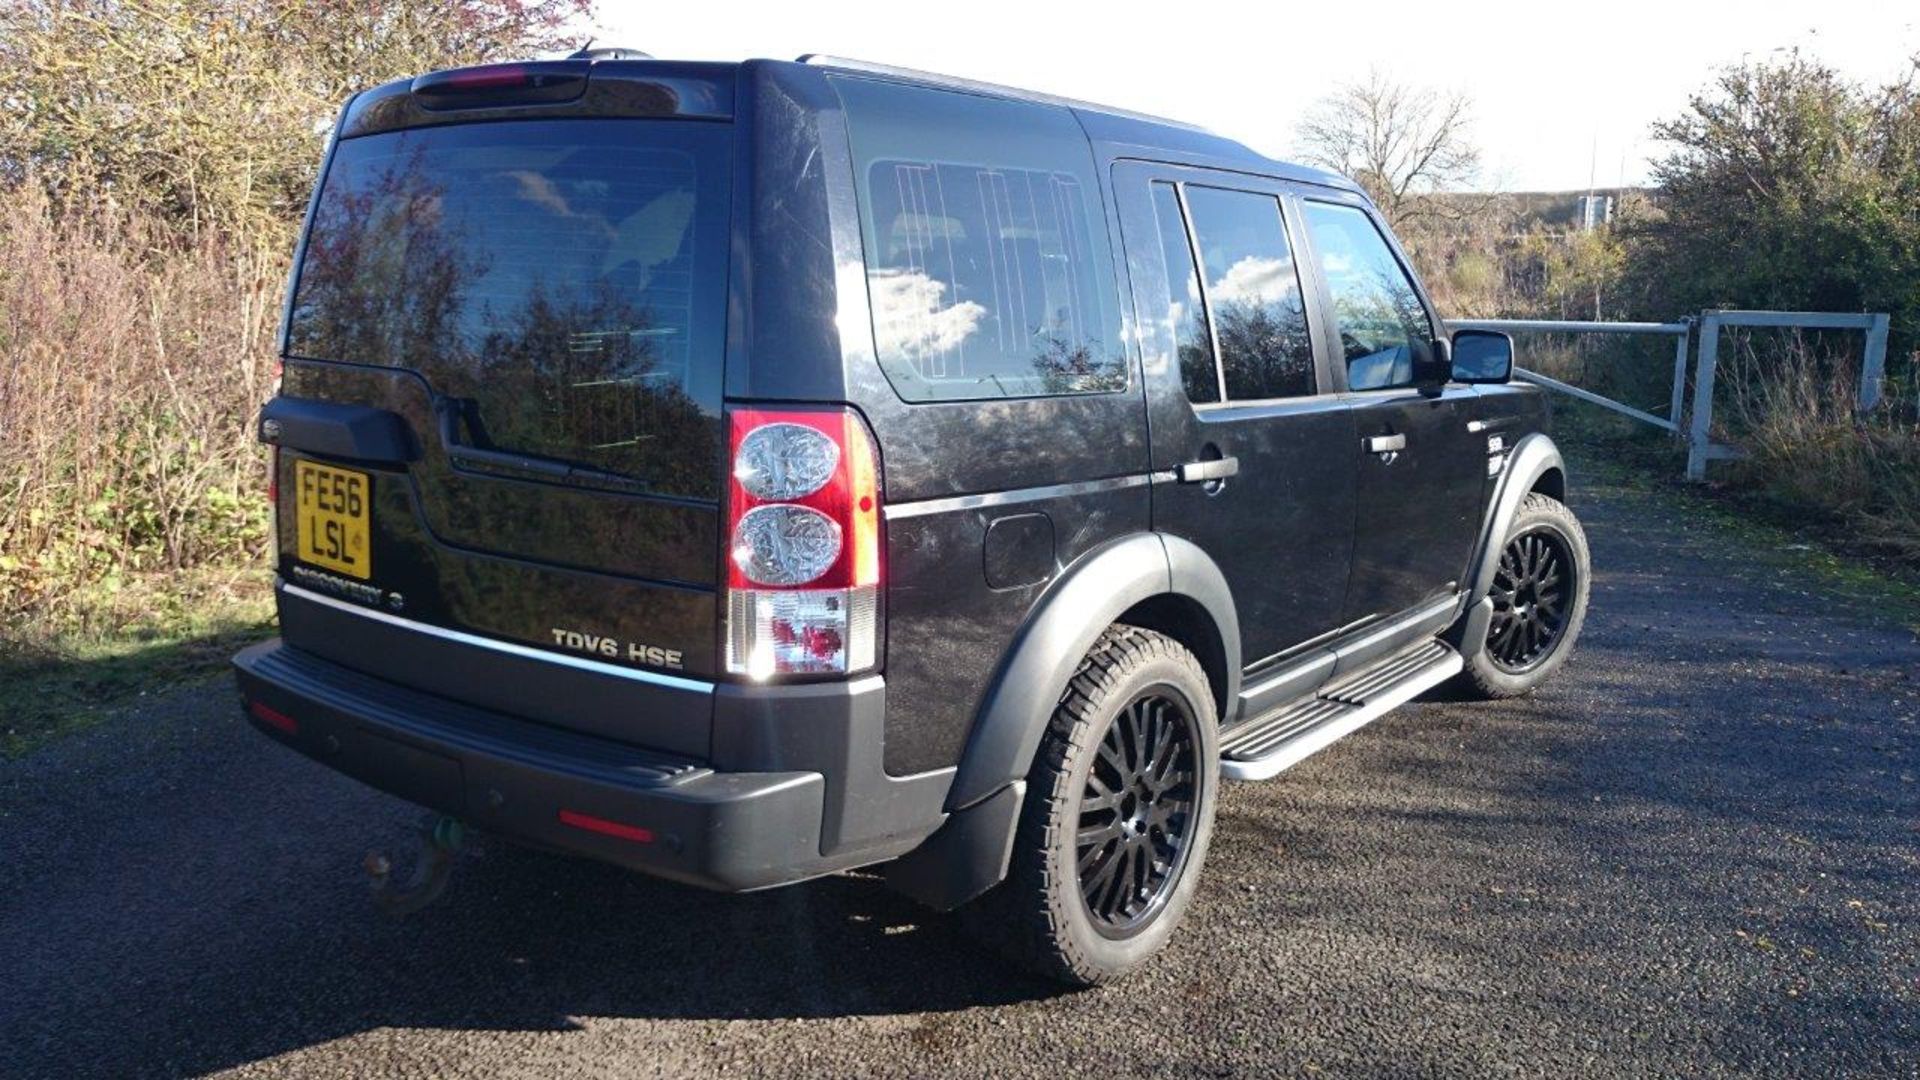 2006/56 REG LAND ROVER DISCOVERY 3 TDV6 HSE AUTO 7 SEAT FULL SERVICE HISTORY *NO VAT* - Image 4 of 21